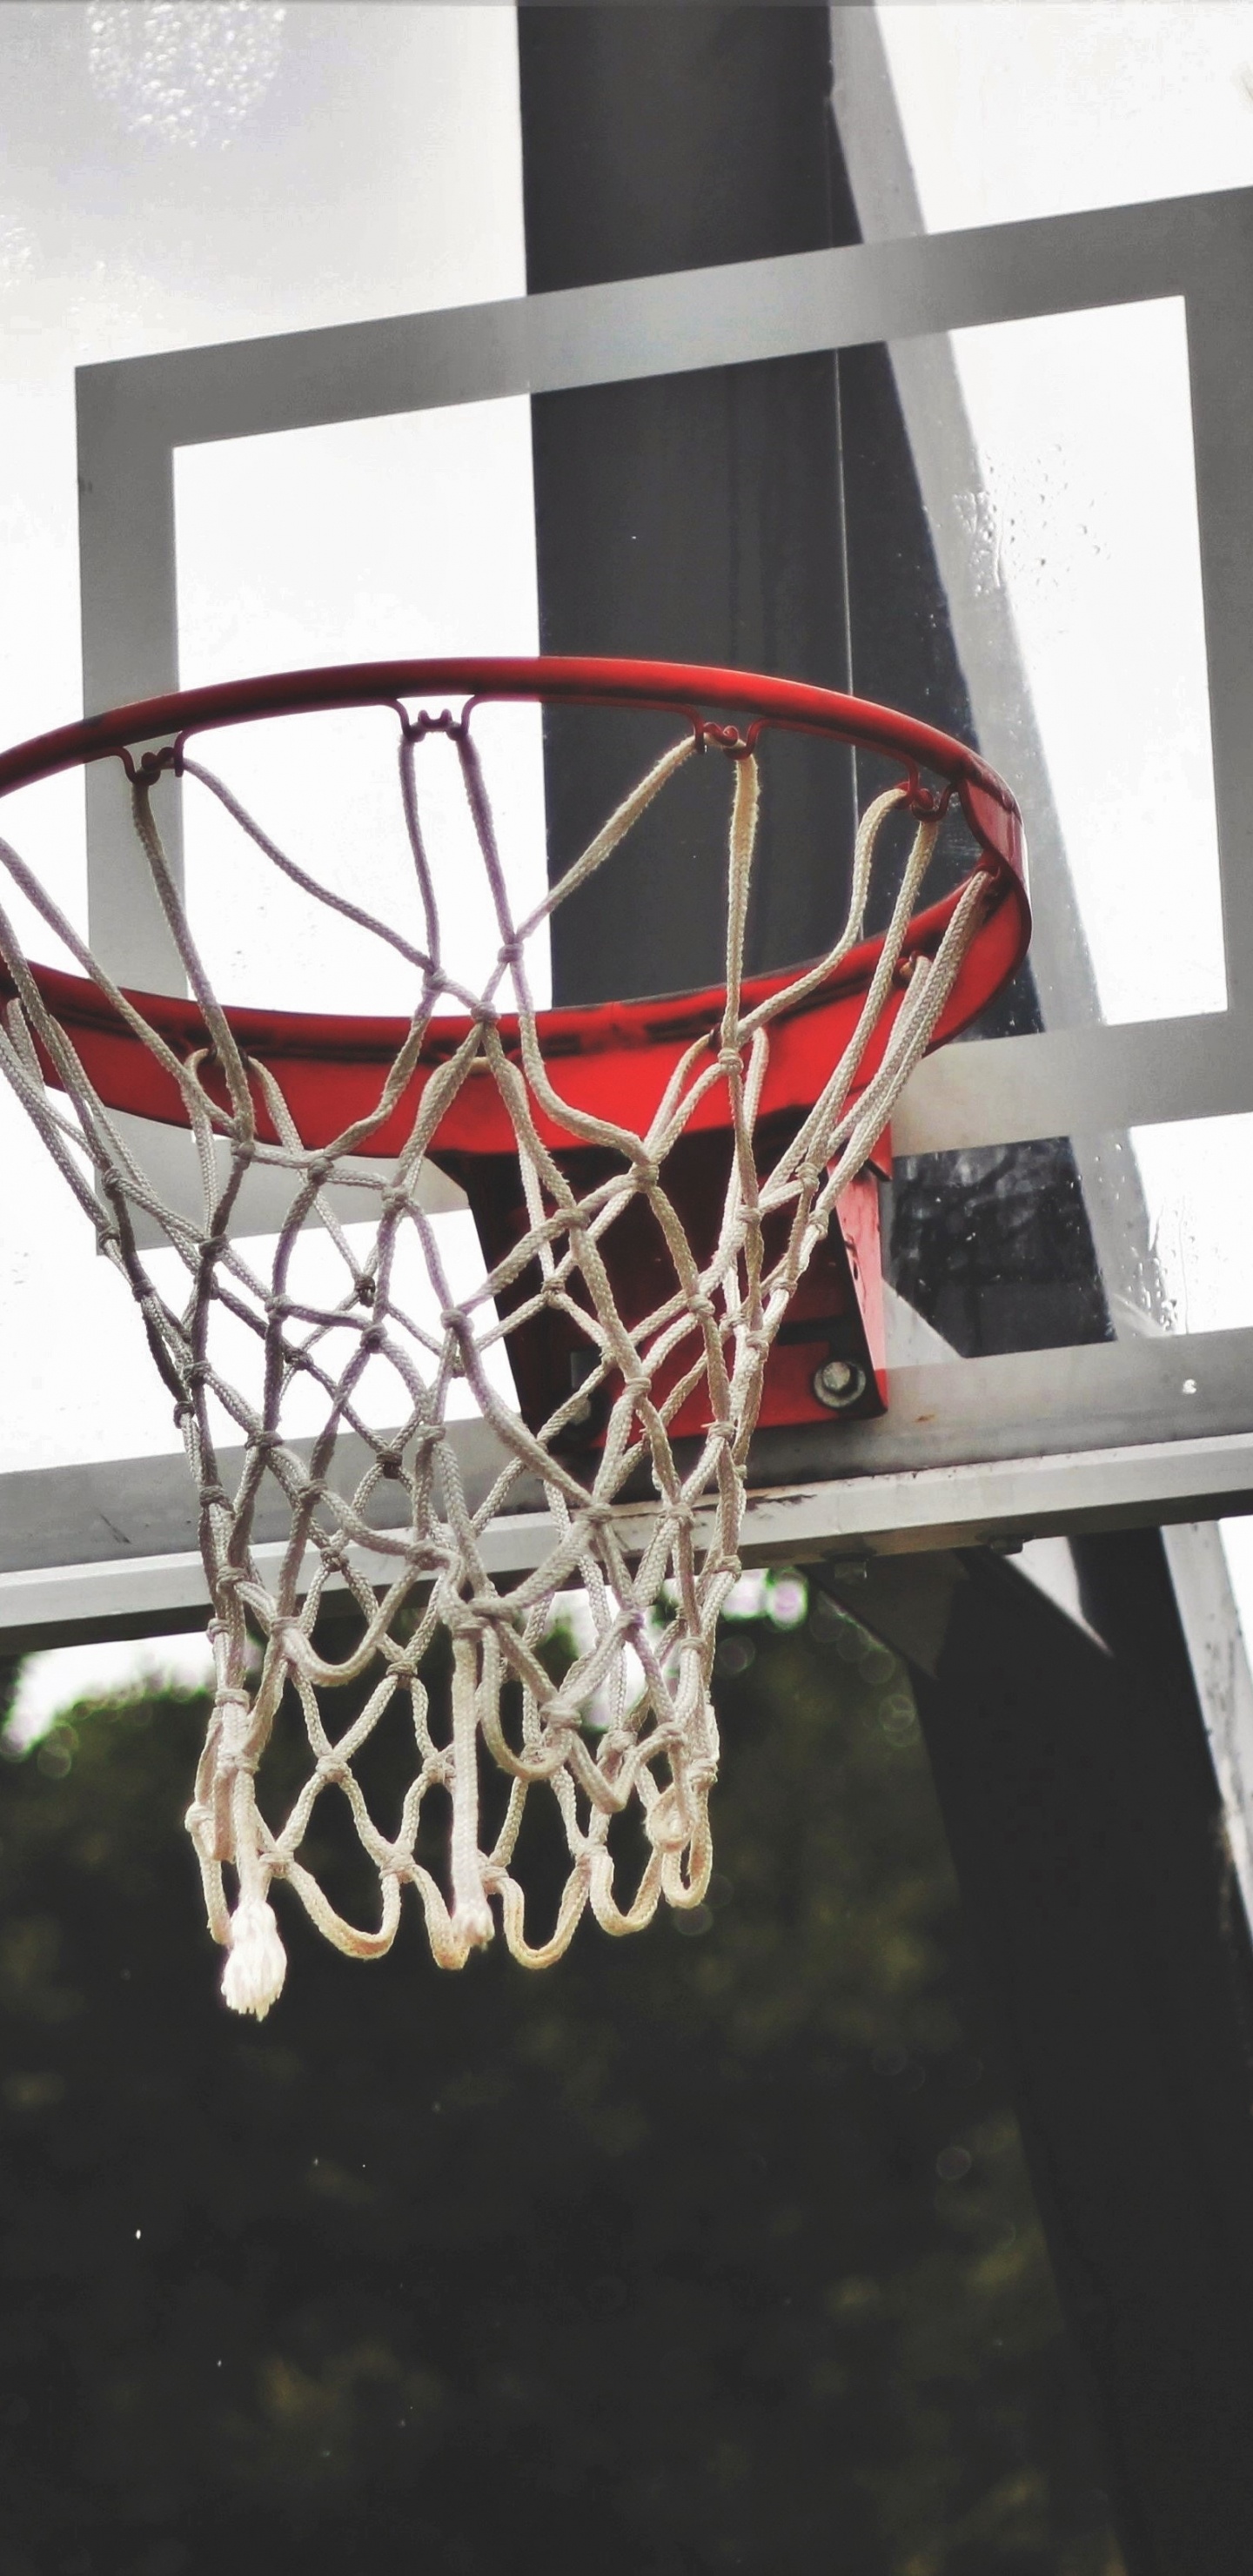 Black and Red Basketball Hoop. Wallpaper in 1440x2960 Resolution